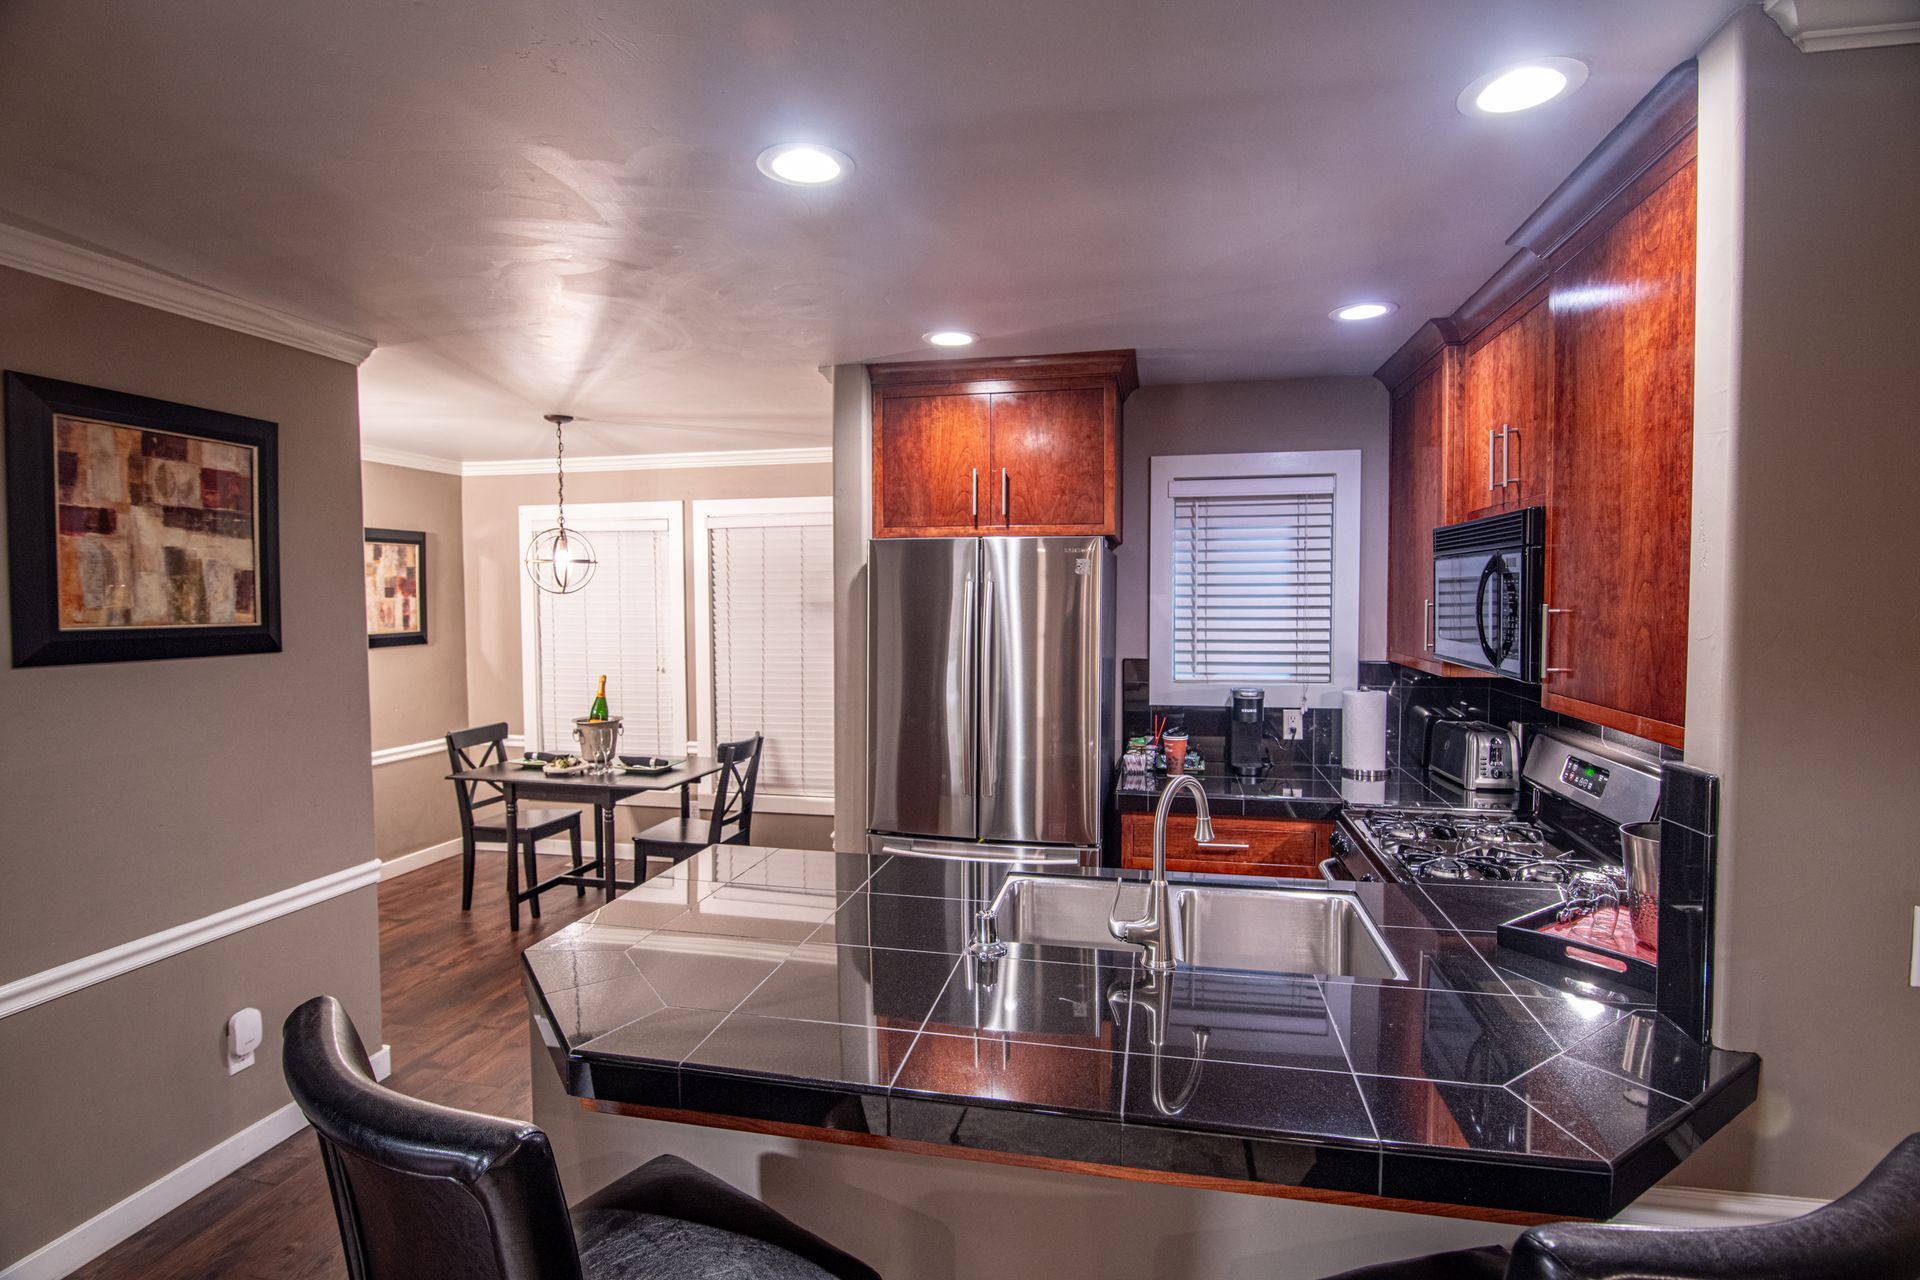 A kitchen with stainless steel appliances and a granite counter top.